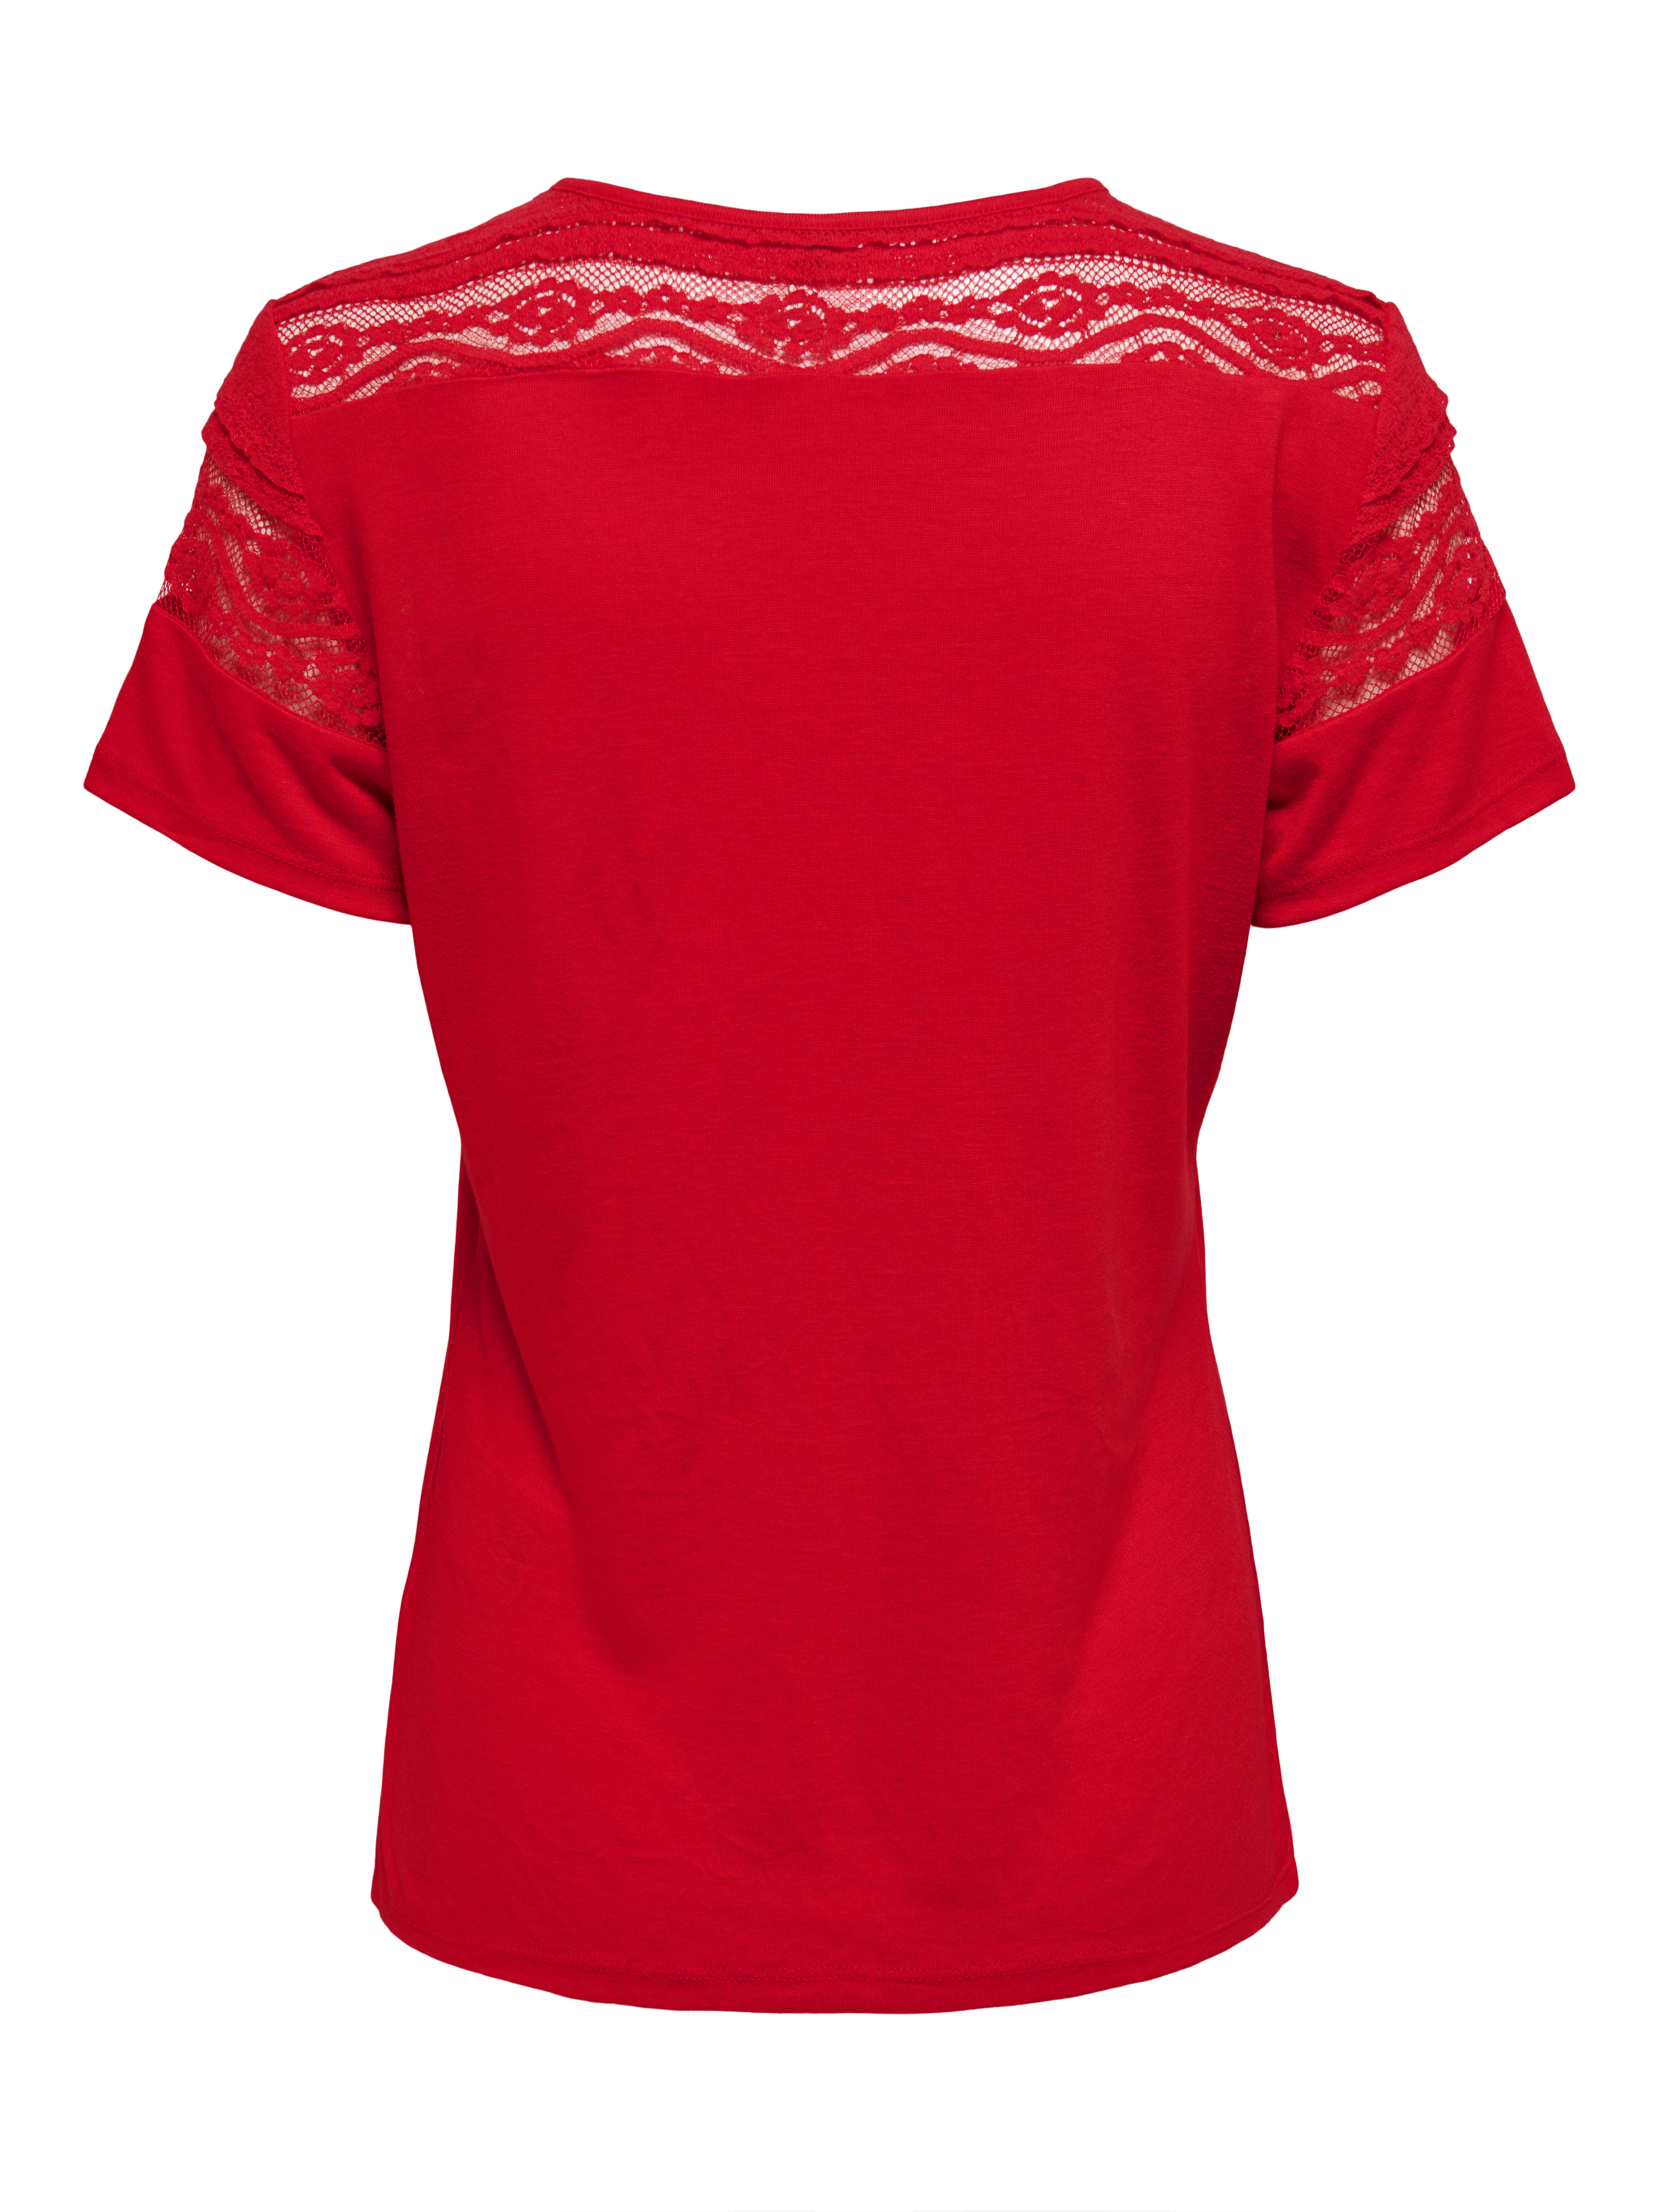 Lace mix Short Sleeved Top with 30% discount!